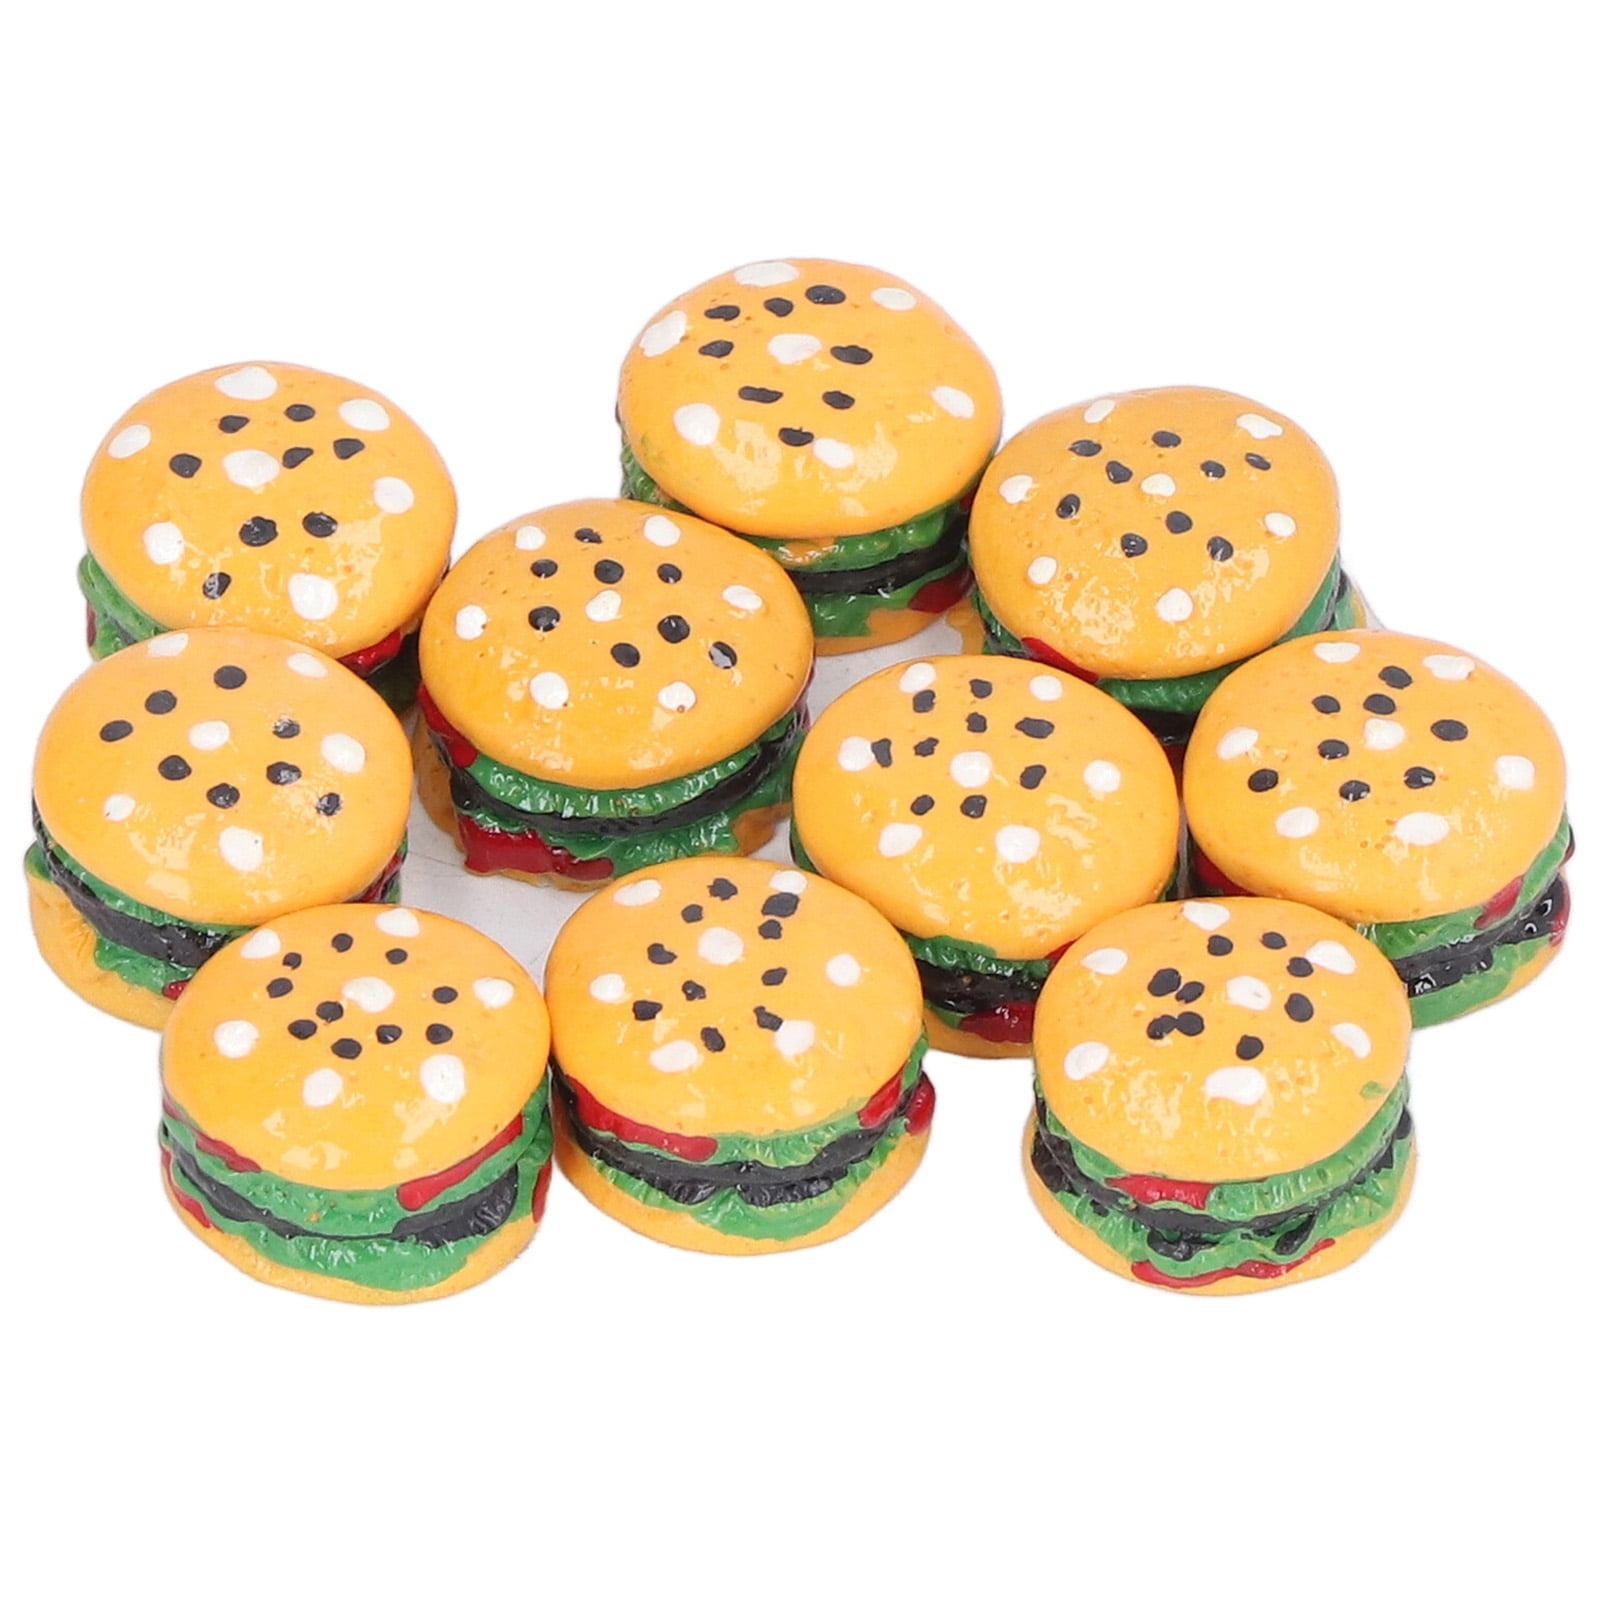 Doll’s House Food Handmade Burger in a Bun 1:24th Scale Set of 4 New 